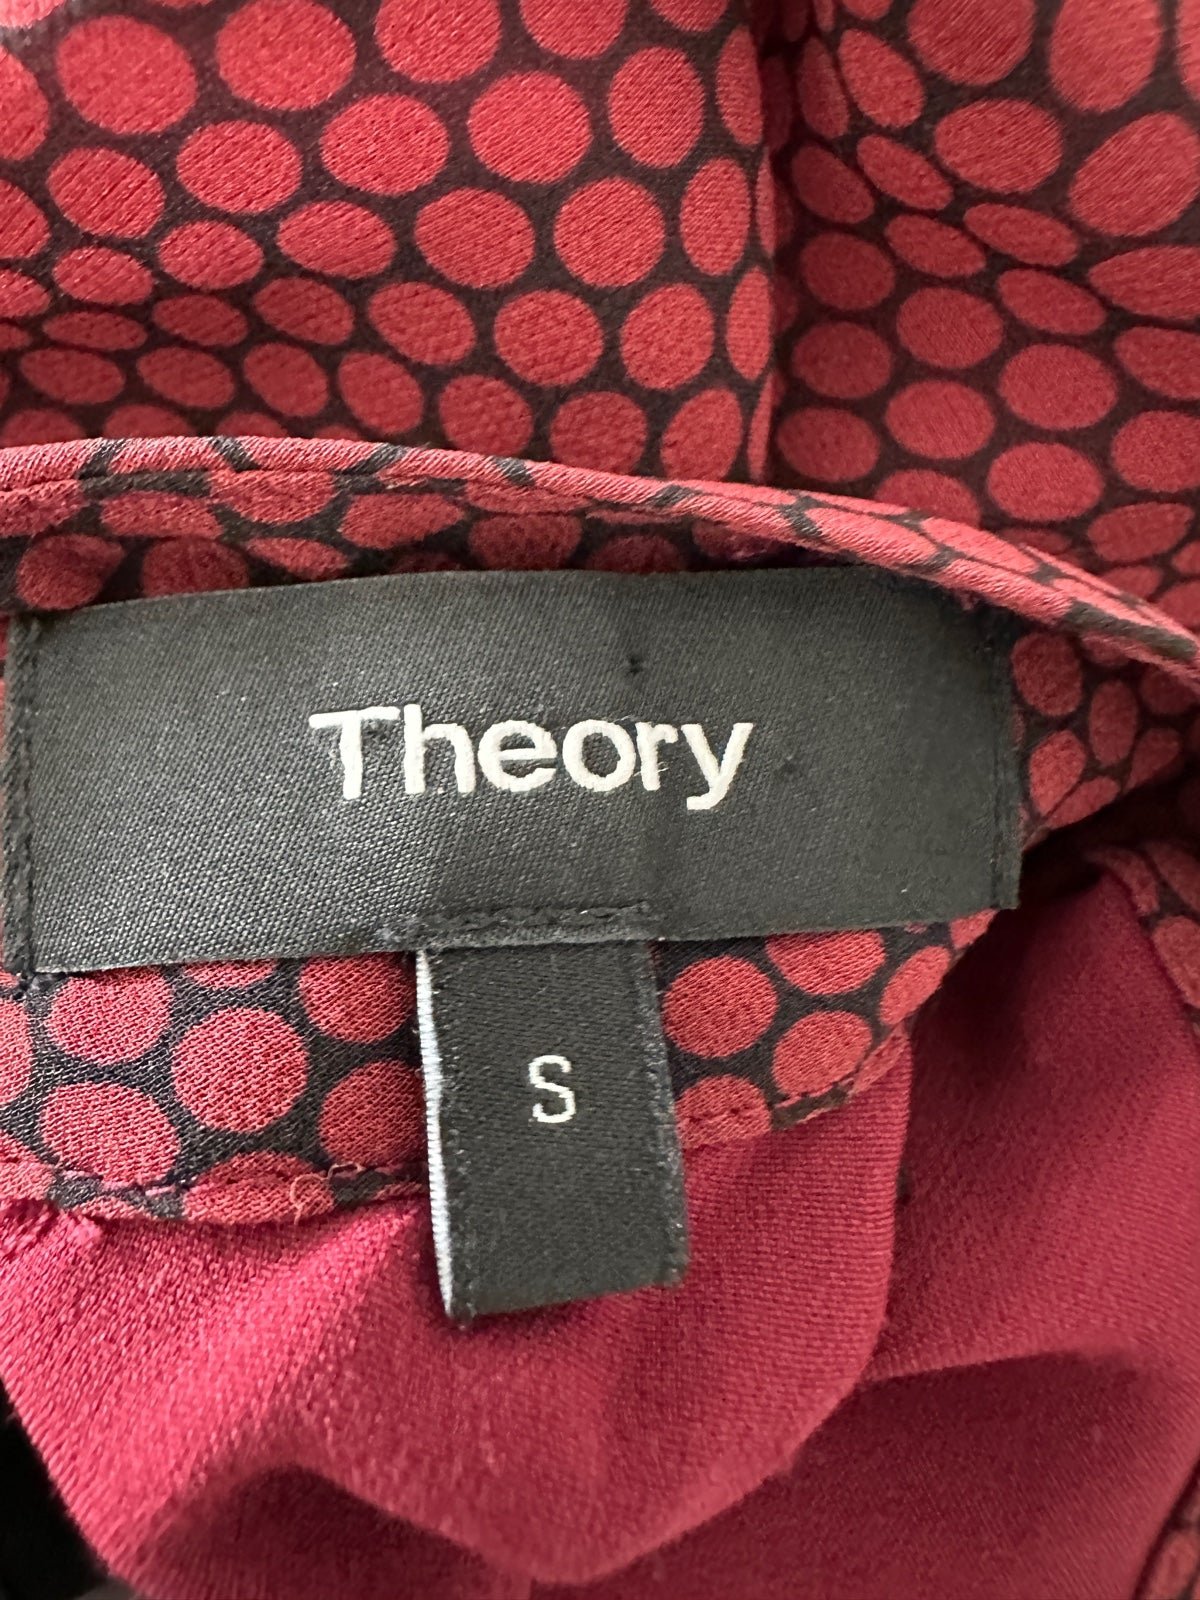 Simple Theory silk red black halter top - size Small P9MivSnKT Fashion